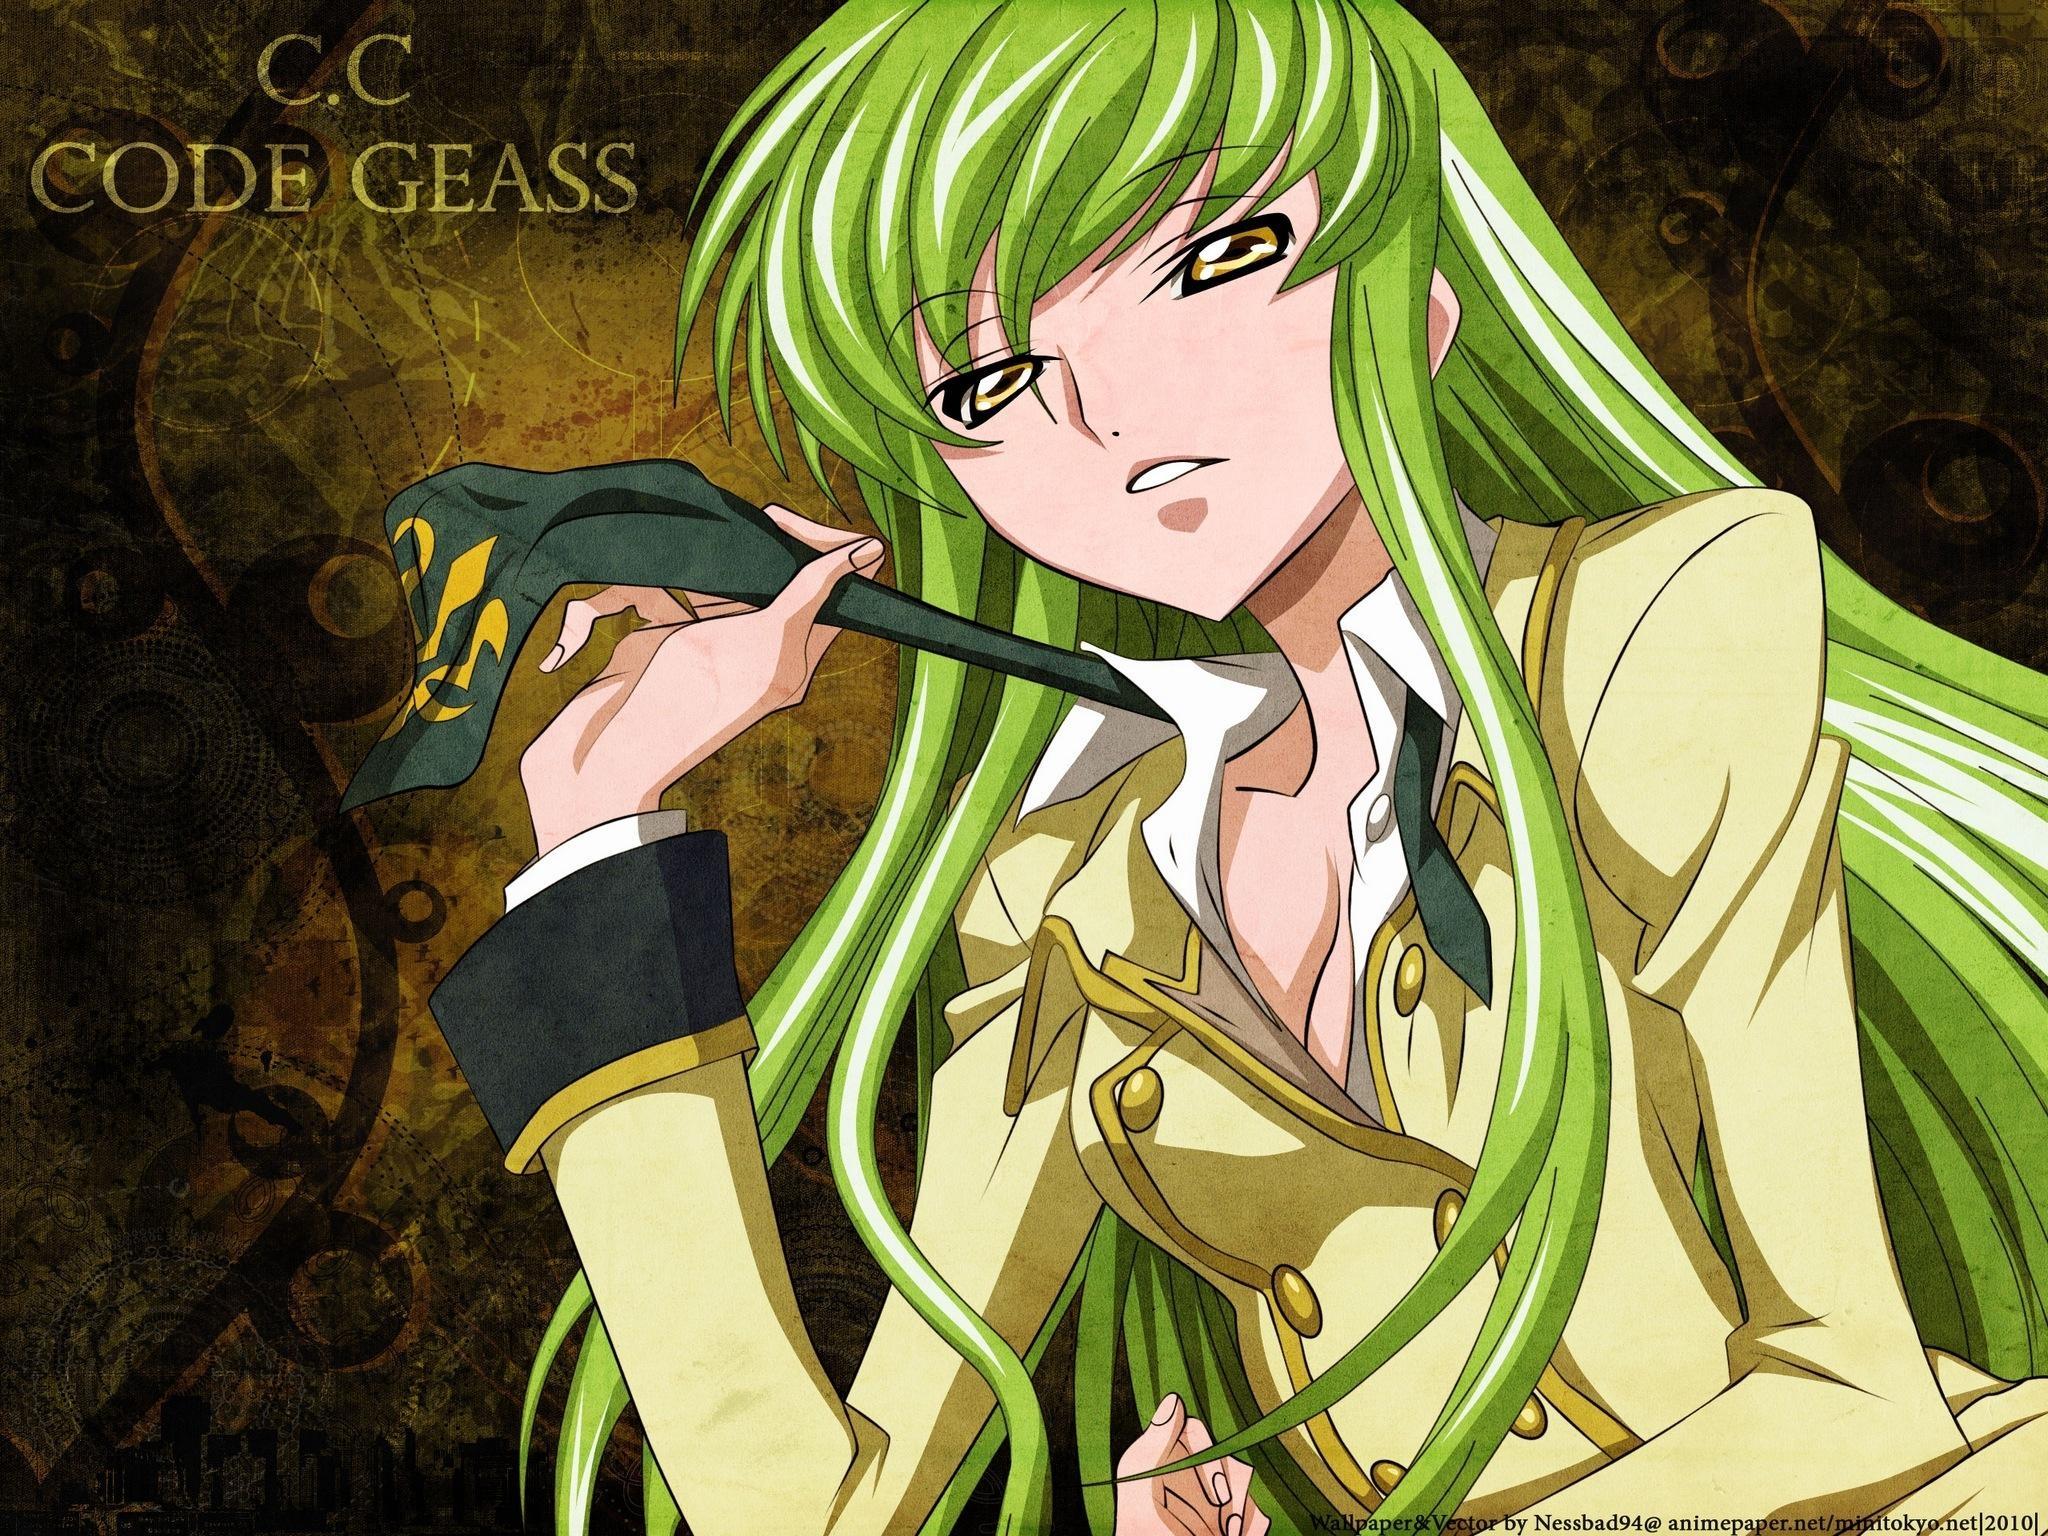 Download wallpaper anime, anime, code geass, Lilus, Sisi, section other in  resolution 1152x864